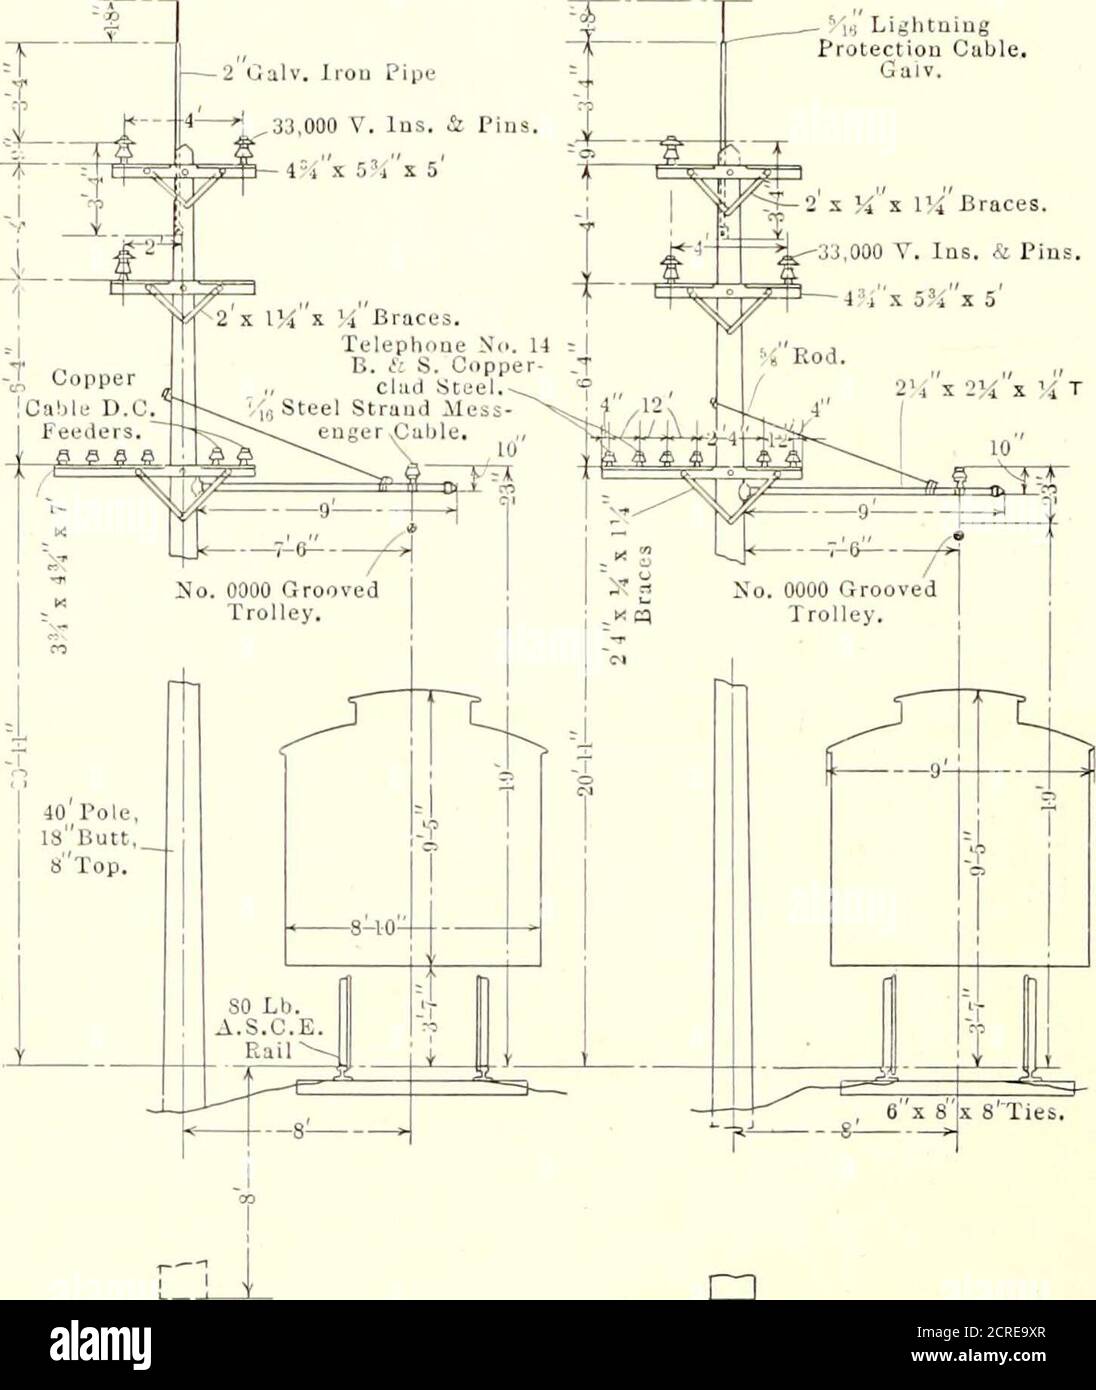 . Electric railway journal . Elevation Bill of Materia) Item No. Icjuantity Article 1 1 Wood Break Strain Insulators 19 1A Wood Break Strain Insulators 19Clevis J4x 12 Galvanized Turnbuckles 3 8 Yin Steel Wire Strand Thimbles 4 10 3Bolt Guy Wire Clamps 12 1mCrosby Clips Galvanized G Messenger Anchor Clamps Type C A 7 2 ?eCTOsby Clips Galvanized 8 2 Trolley Anchor Hnugers 9 325 Kii Galvanized Steel Strand 10 Id ^Galvanized Steel Strand U Messenger Cable 12 Trolley Wire 13 Guy Ancbors Electric R. Juwwl Galveston-Houston Railway—Line Anchor of CatenaryTrolley Line LightningProtection Cable.. Regu Stock Photo